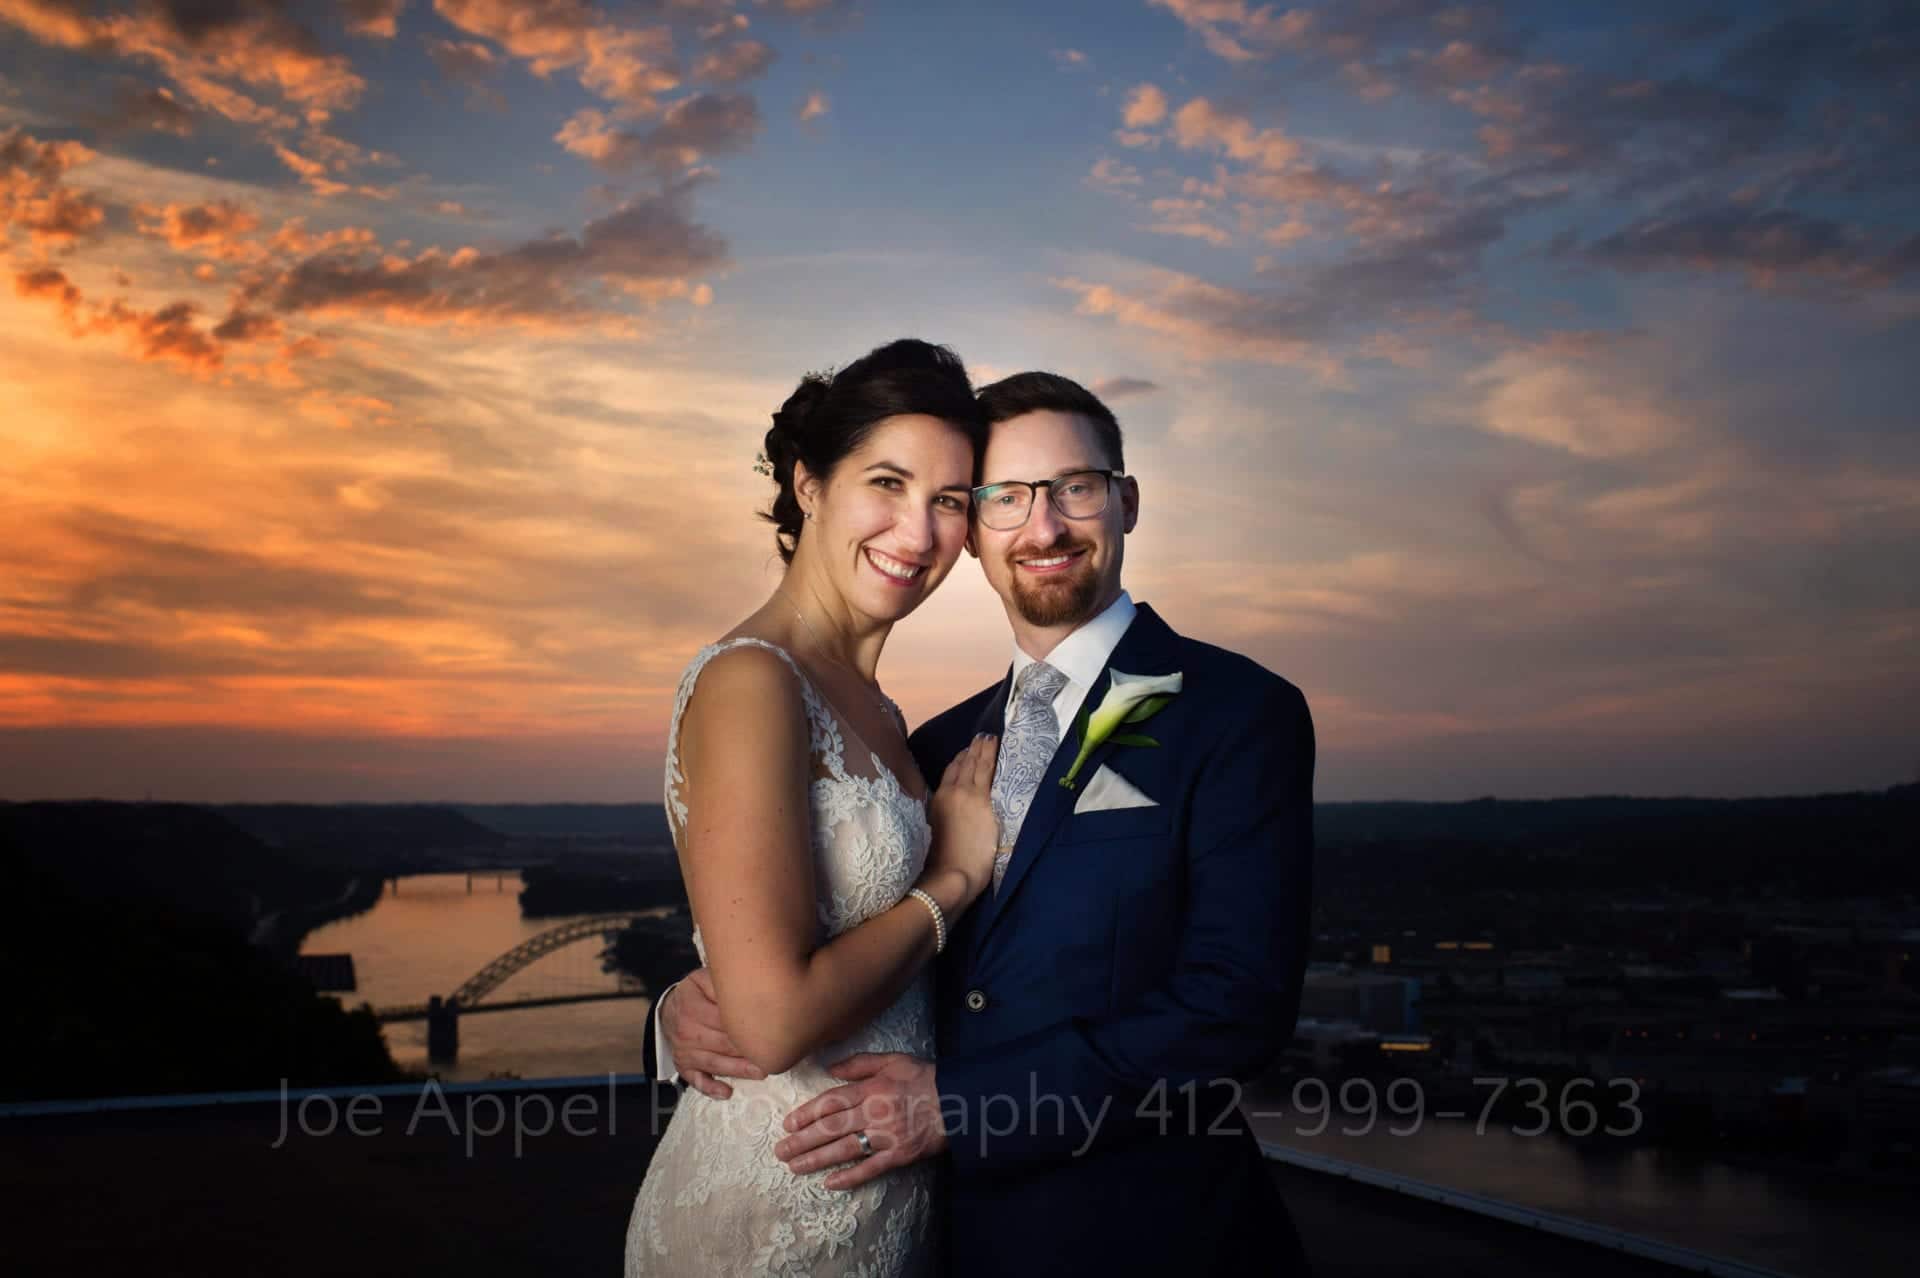 With a dramatic sunset behind them, a couple stands with their heads touching.